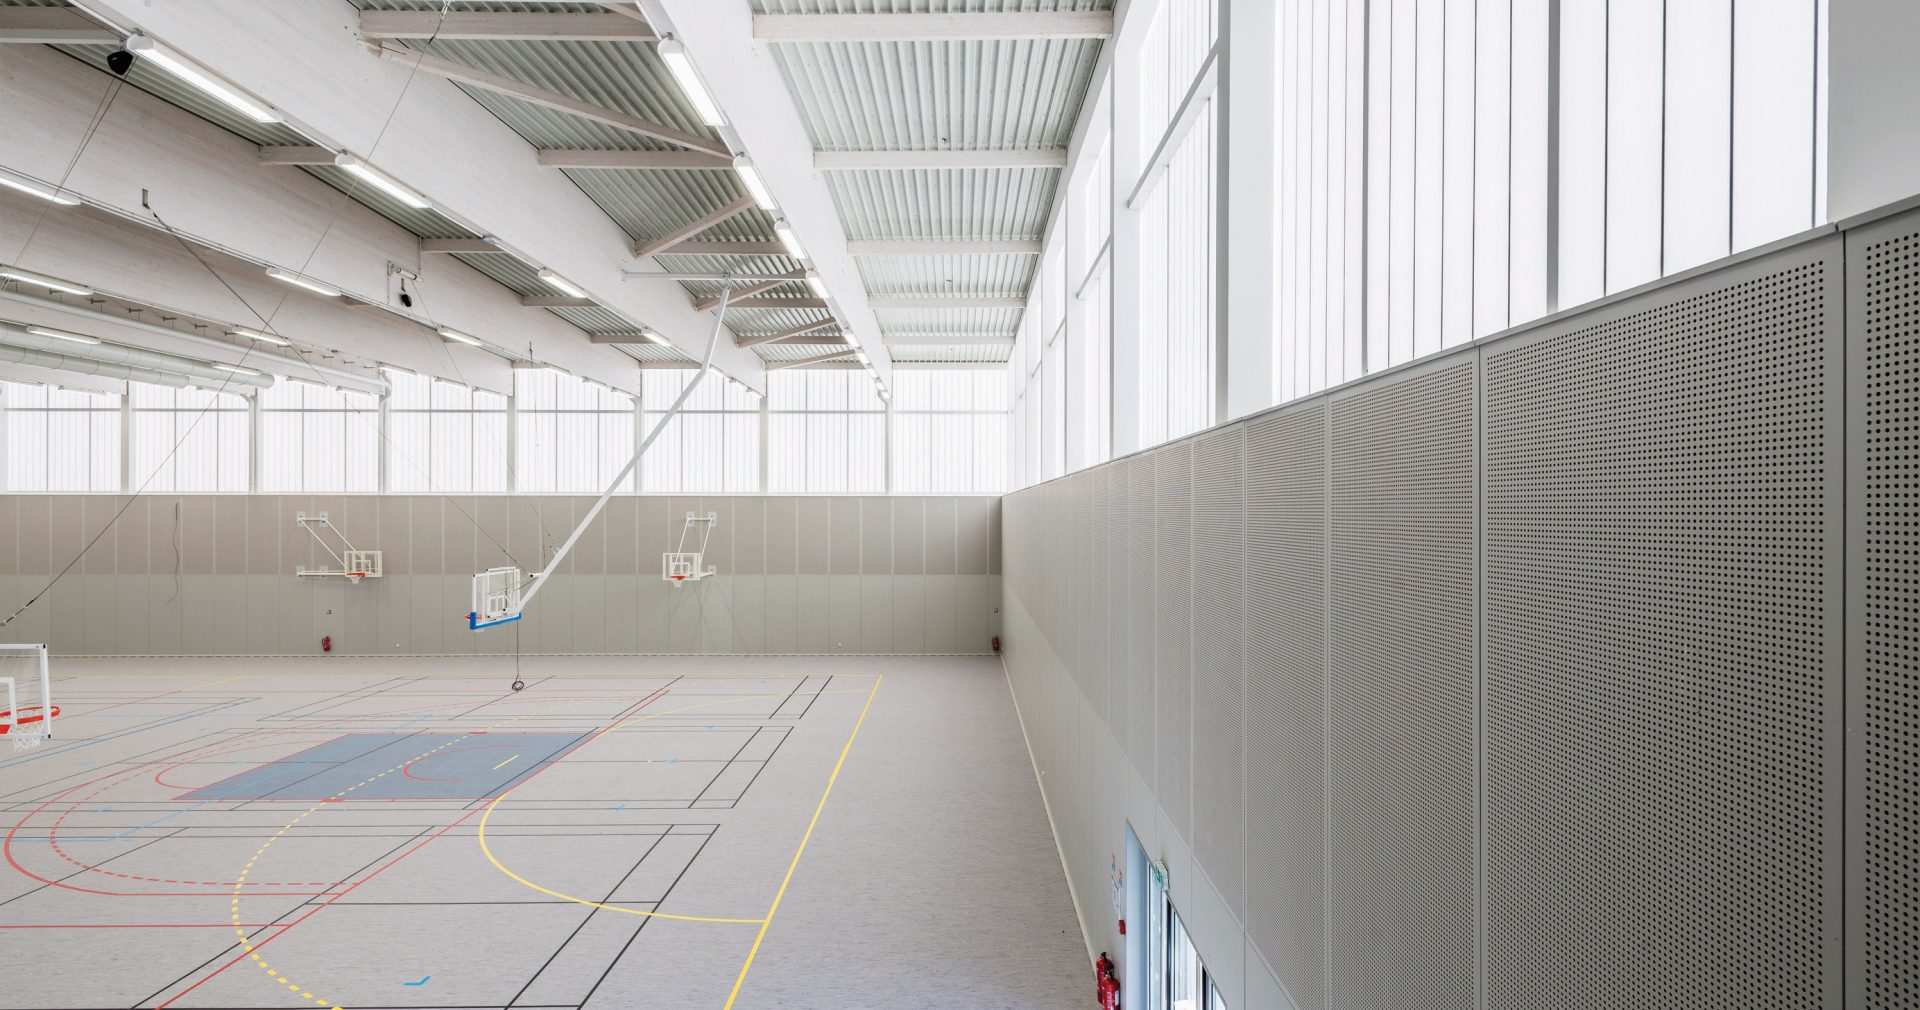 Minimalistic interior of Complexe Sportif featuring three basketball hoops in space with translucent wall panels from Kawall